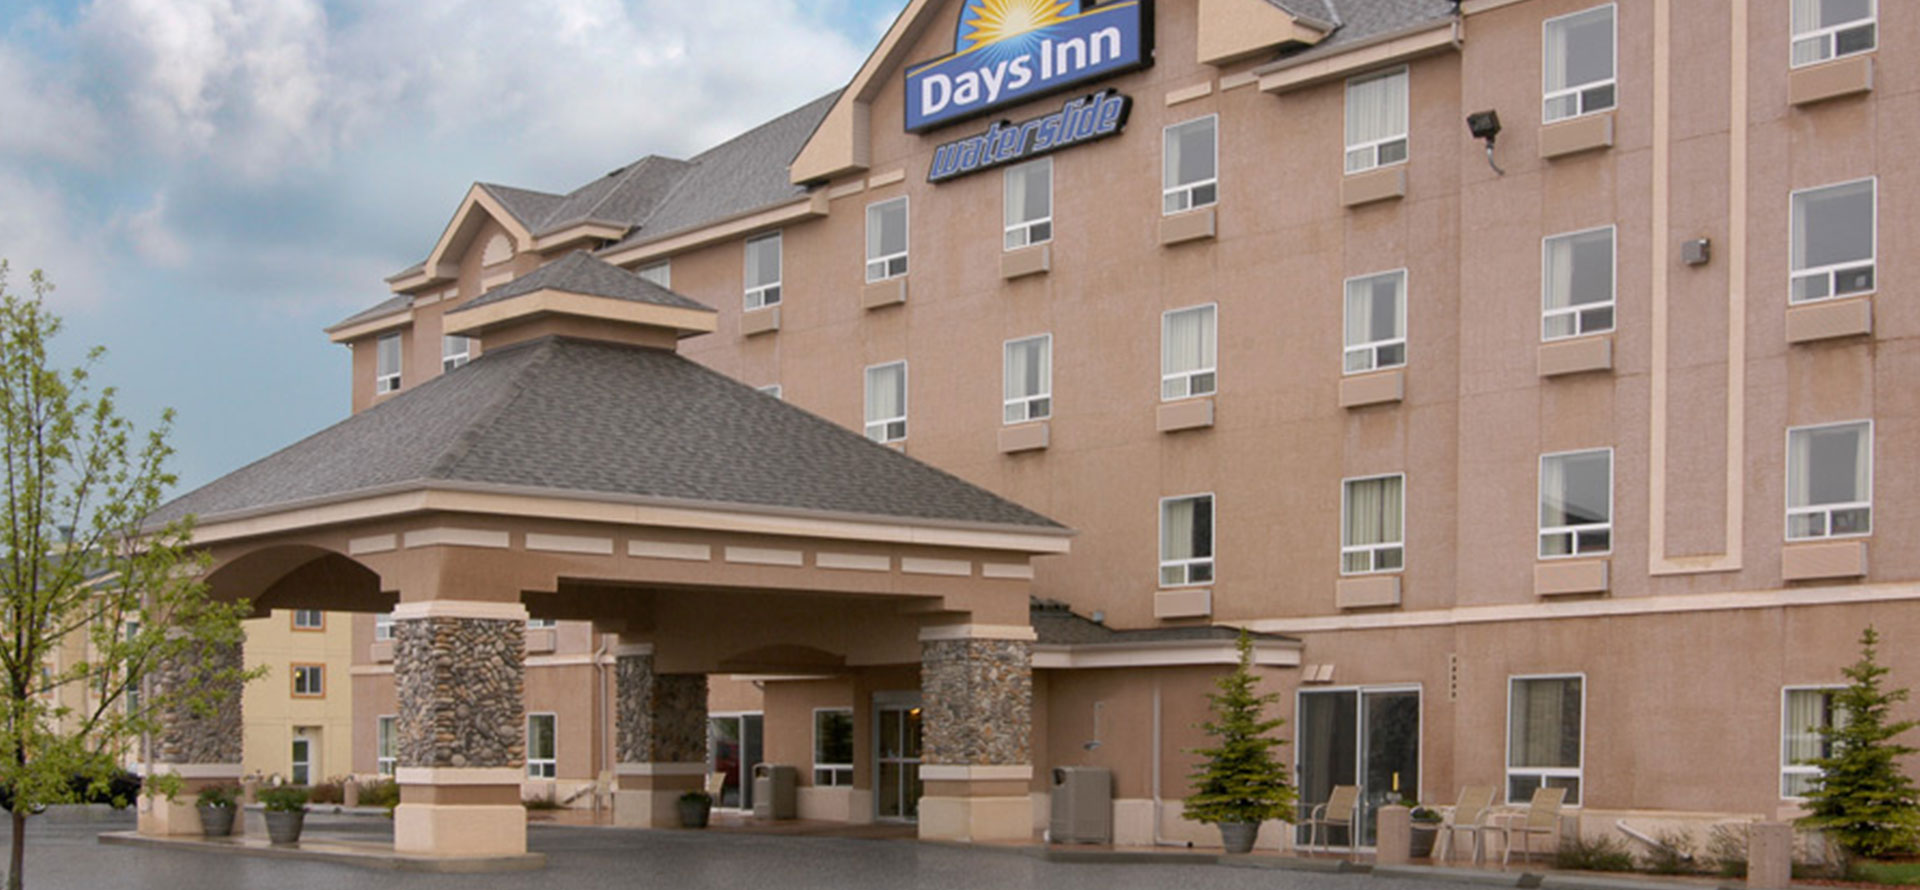 Large view of main entrance to Days Inn Red Deer, Alberta with a stone and concrete portico and the corporate logo placed at the summit of the hotel.
